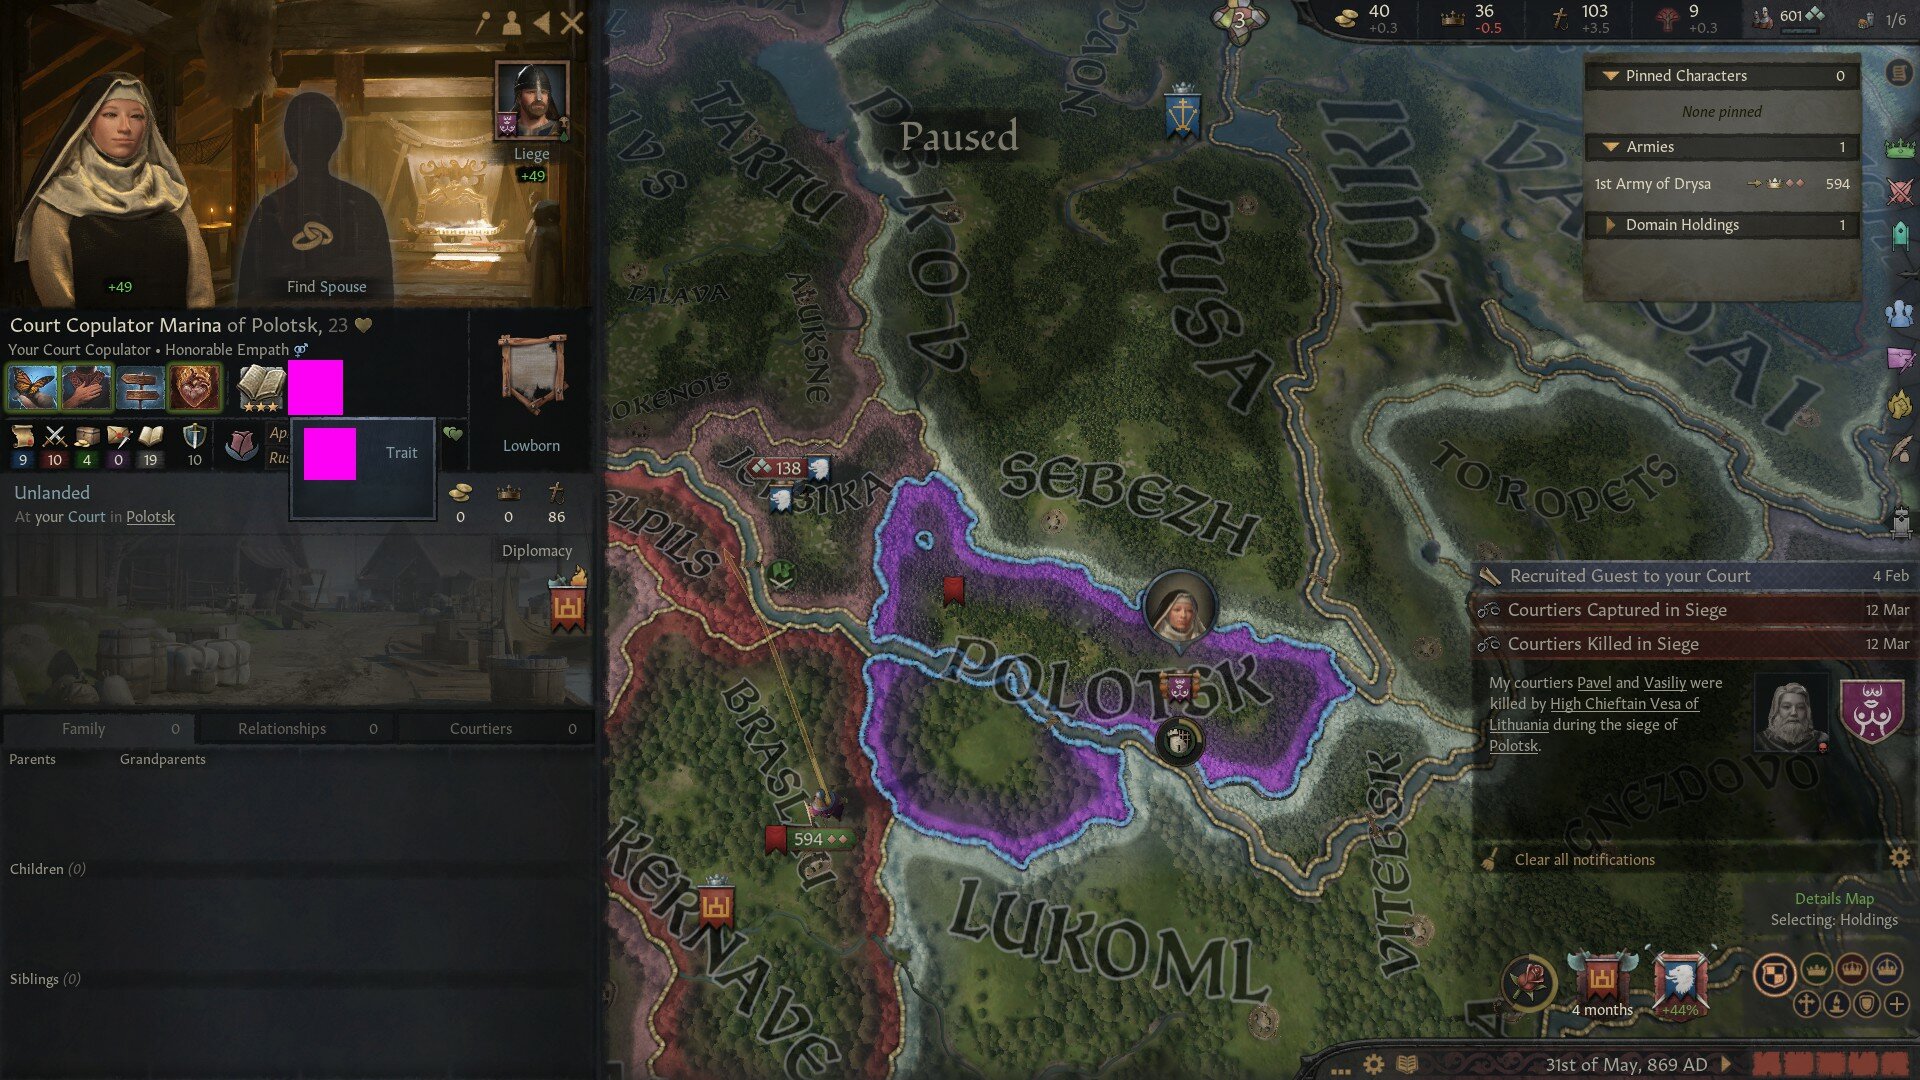 [mod] Adroit Religion - Page 12 - Crusader Kings 3 - LoversLab